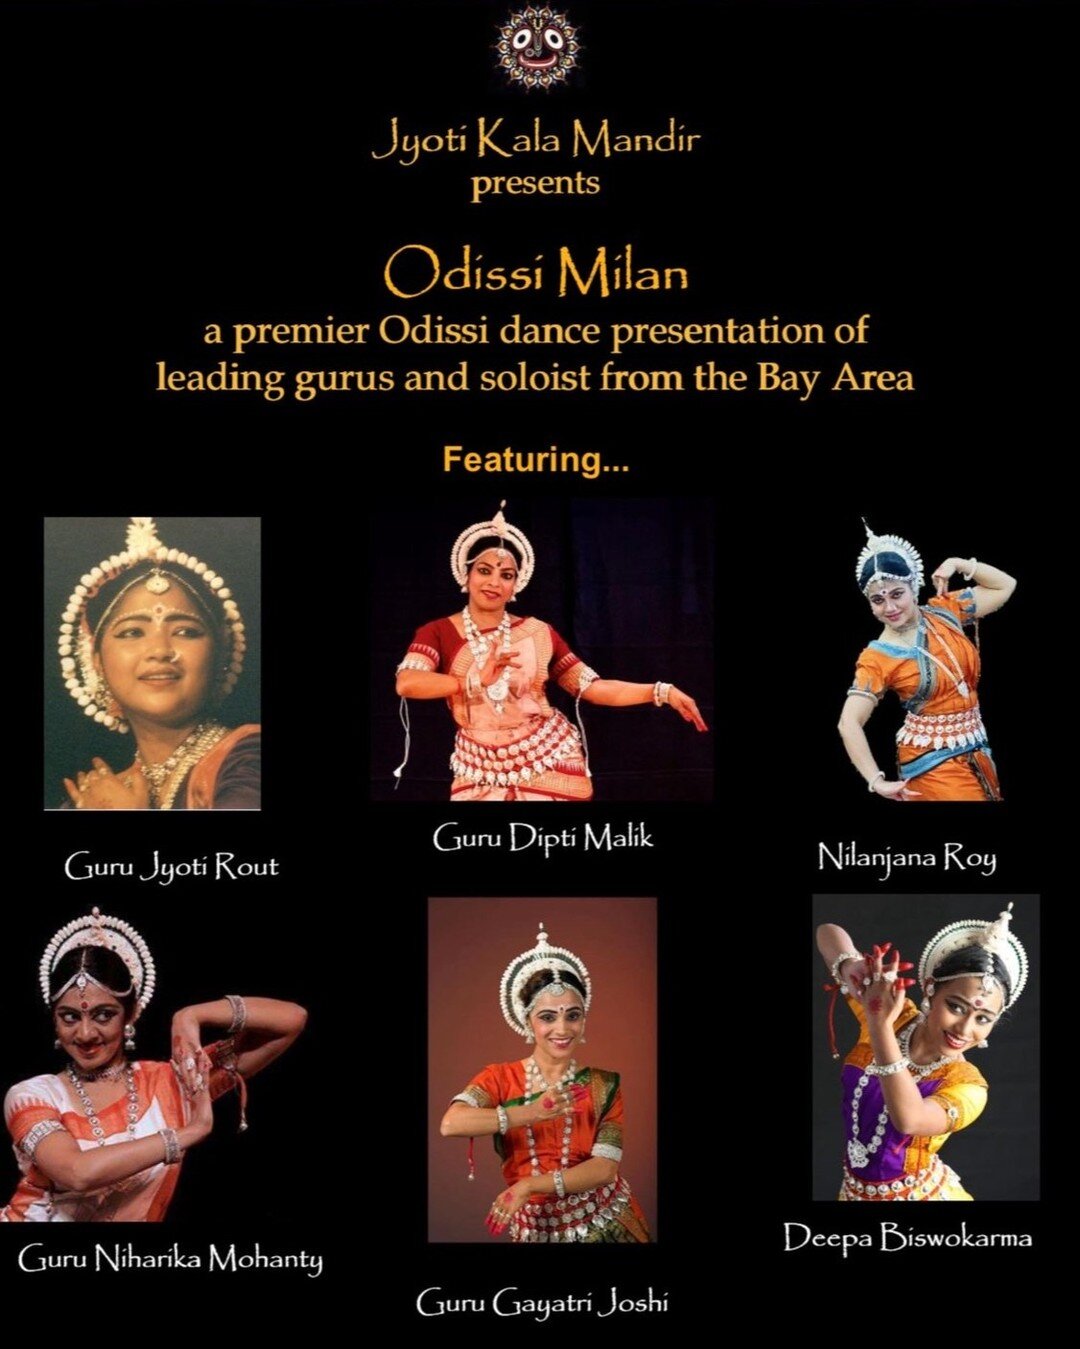 Jyoti Kala Mandir Founder/ Director Guru Jyoti Rout presents Odissi Milan, a premier Odissi dance presentation of leading Gurus and soloists from the Bay Area.

Tickets available in advance only at:
https://tinyurl.com/MilanOdissi

#odissi #odissidan